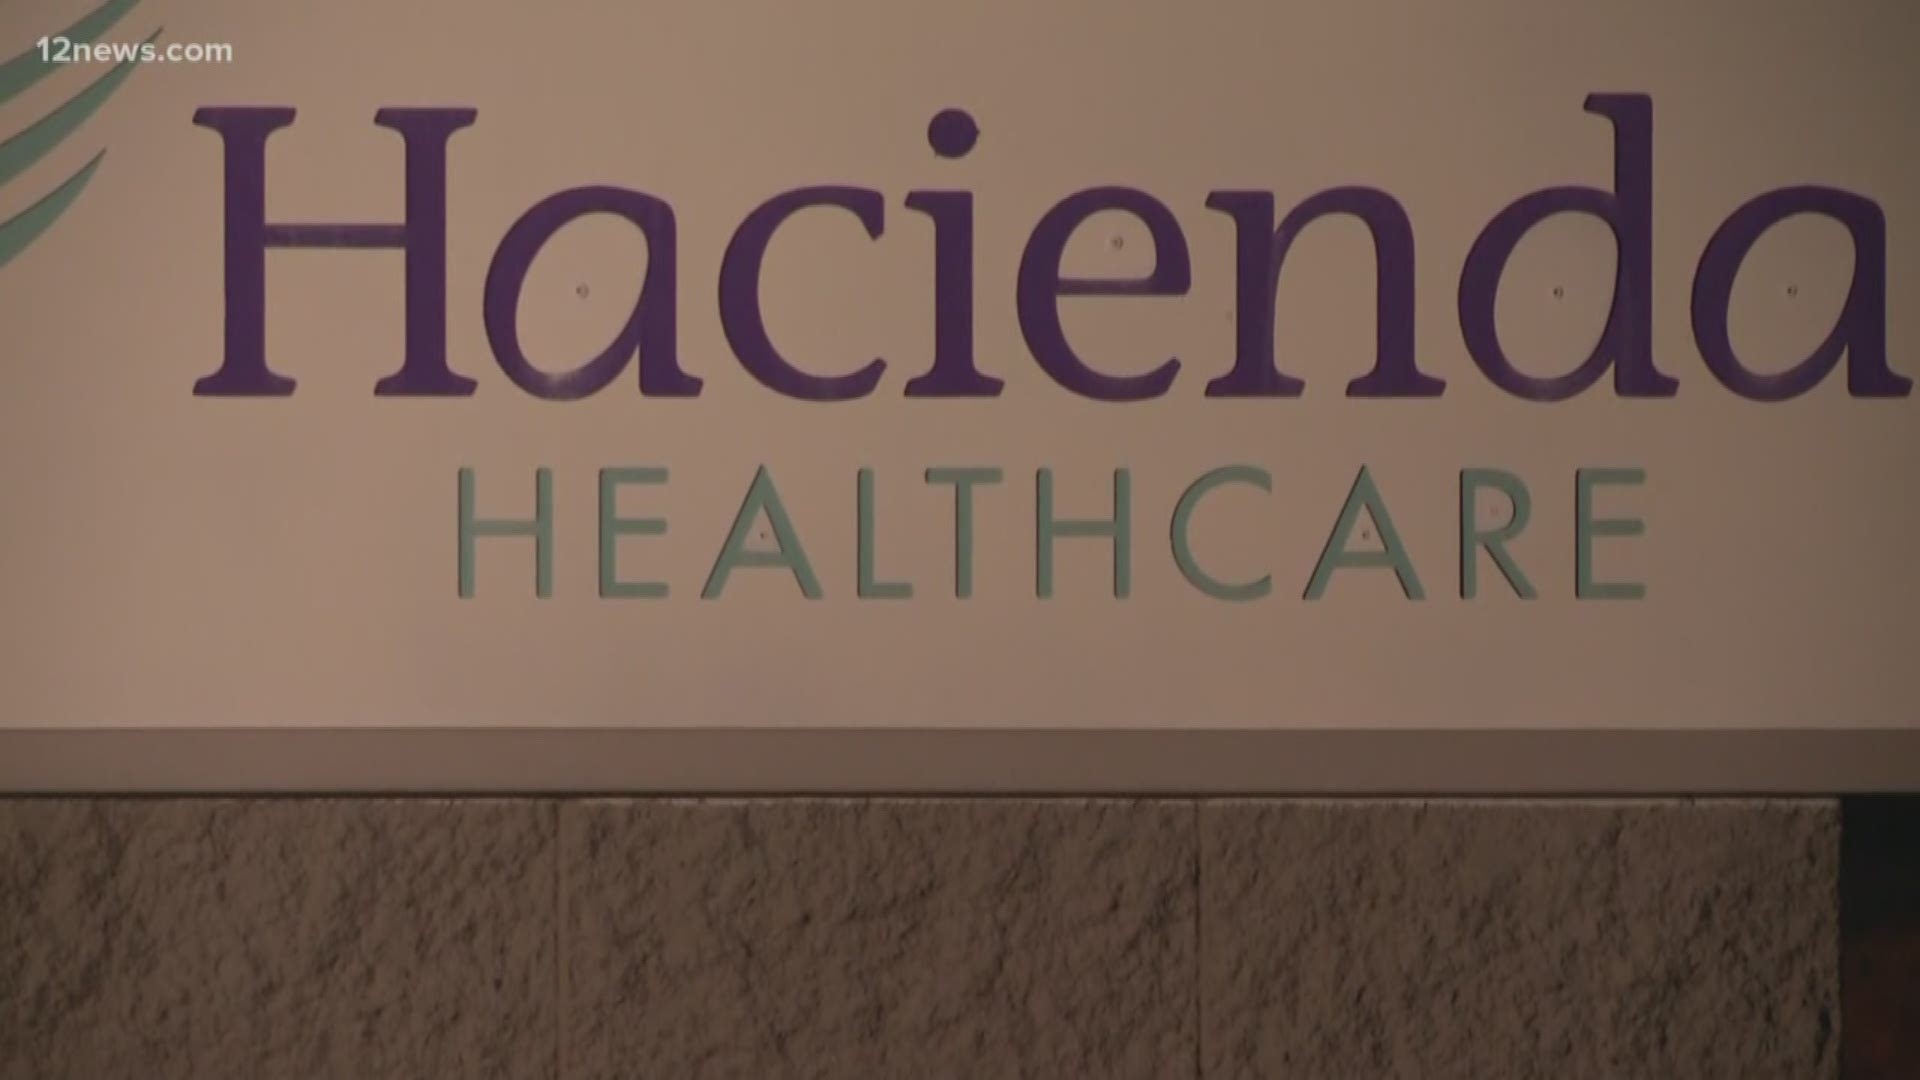 Today, Hacienda Healthcare announced they are closing the unit of the facility that houses intellectually disabled patients after a woman living in the unit was allegedly raped by her male nurse. Now, families of patients and employees of the unit are left with limited options.